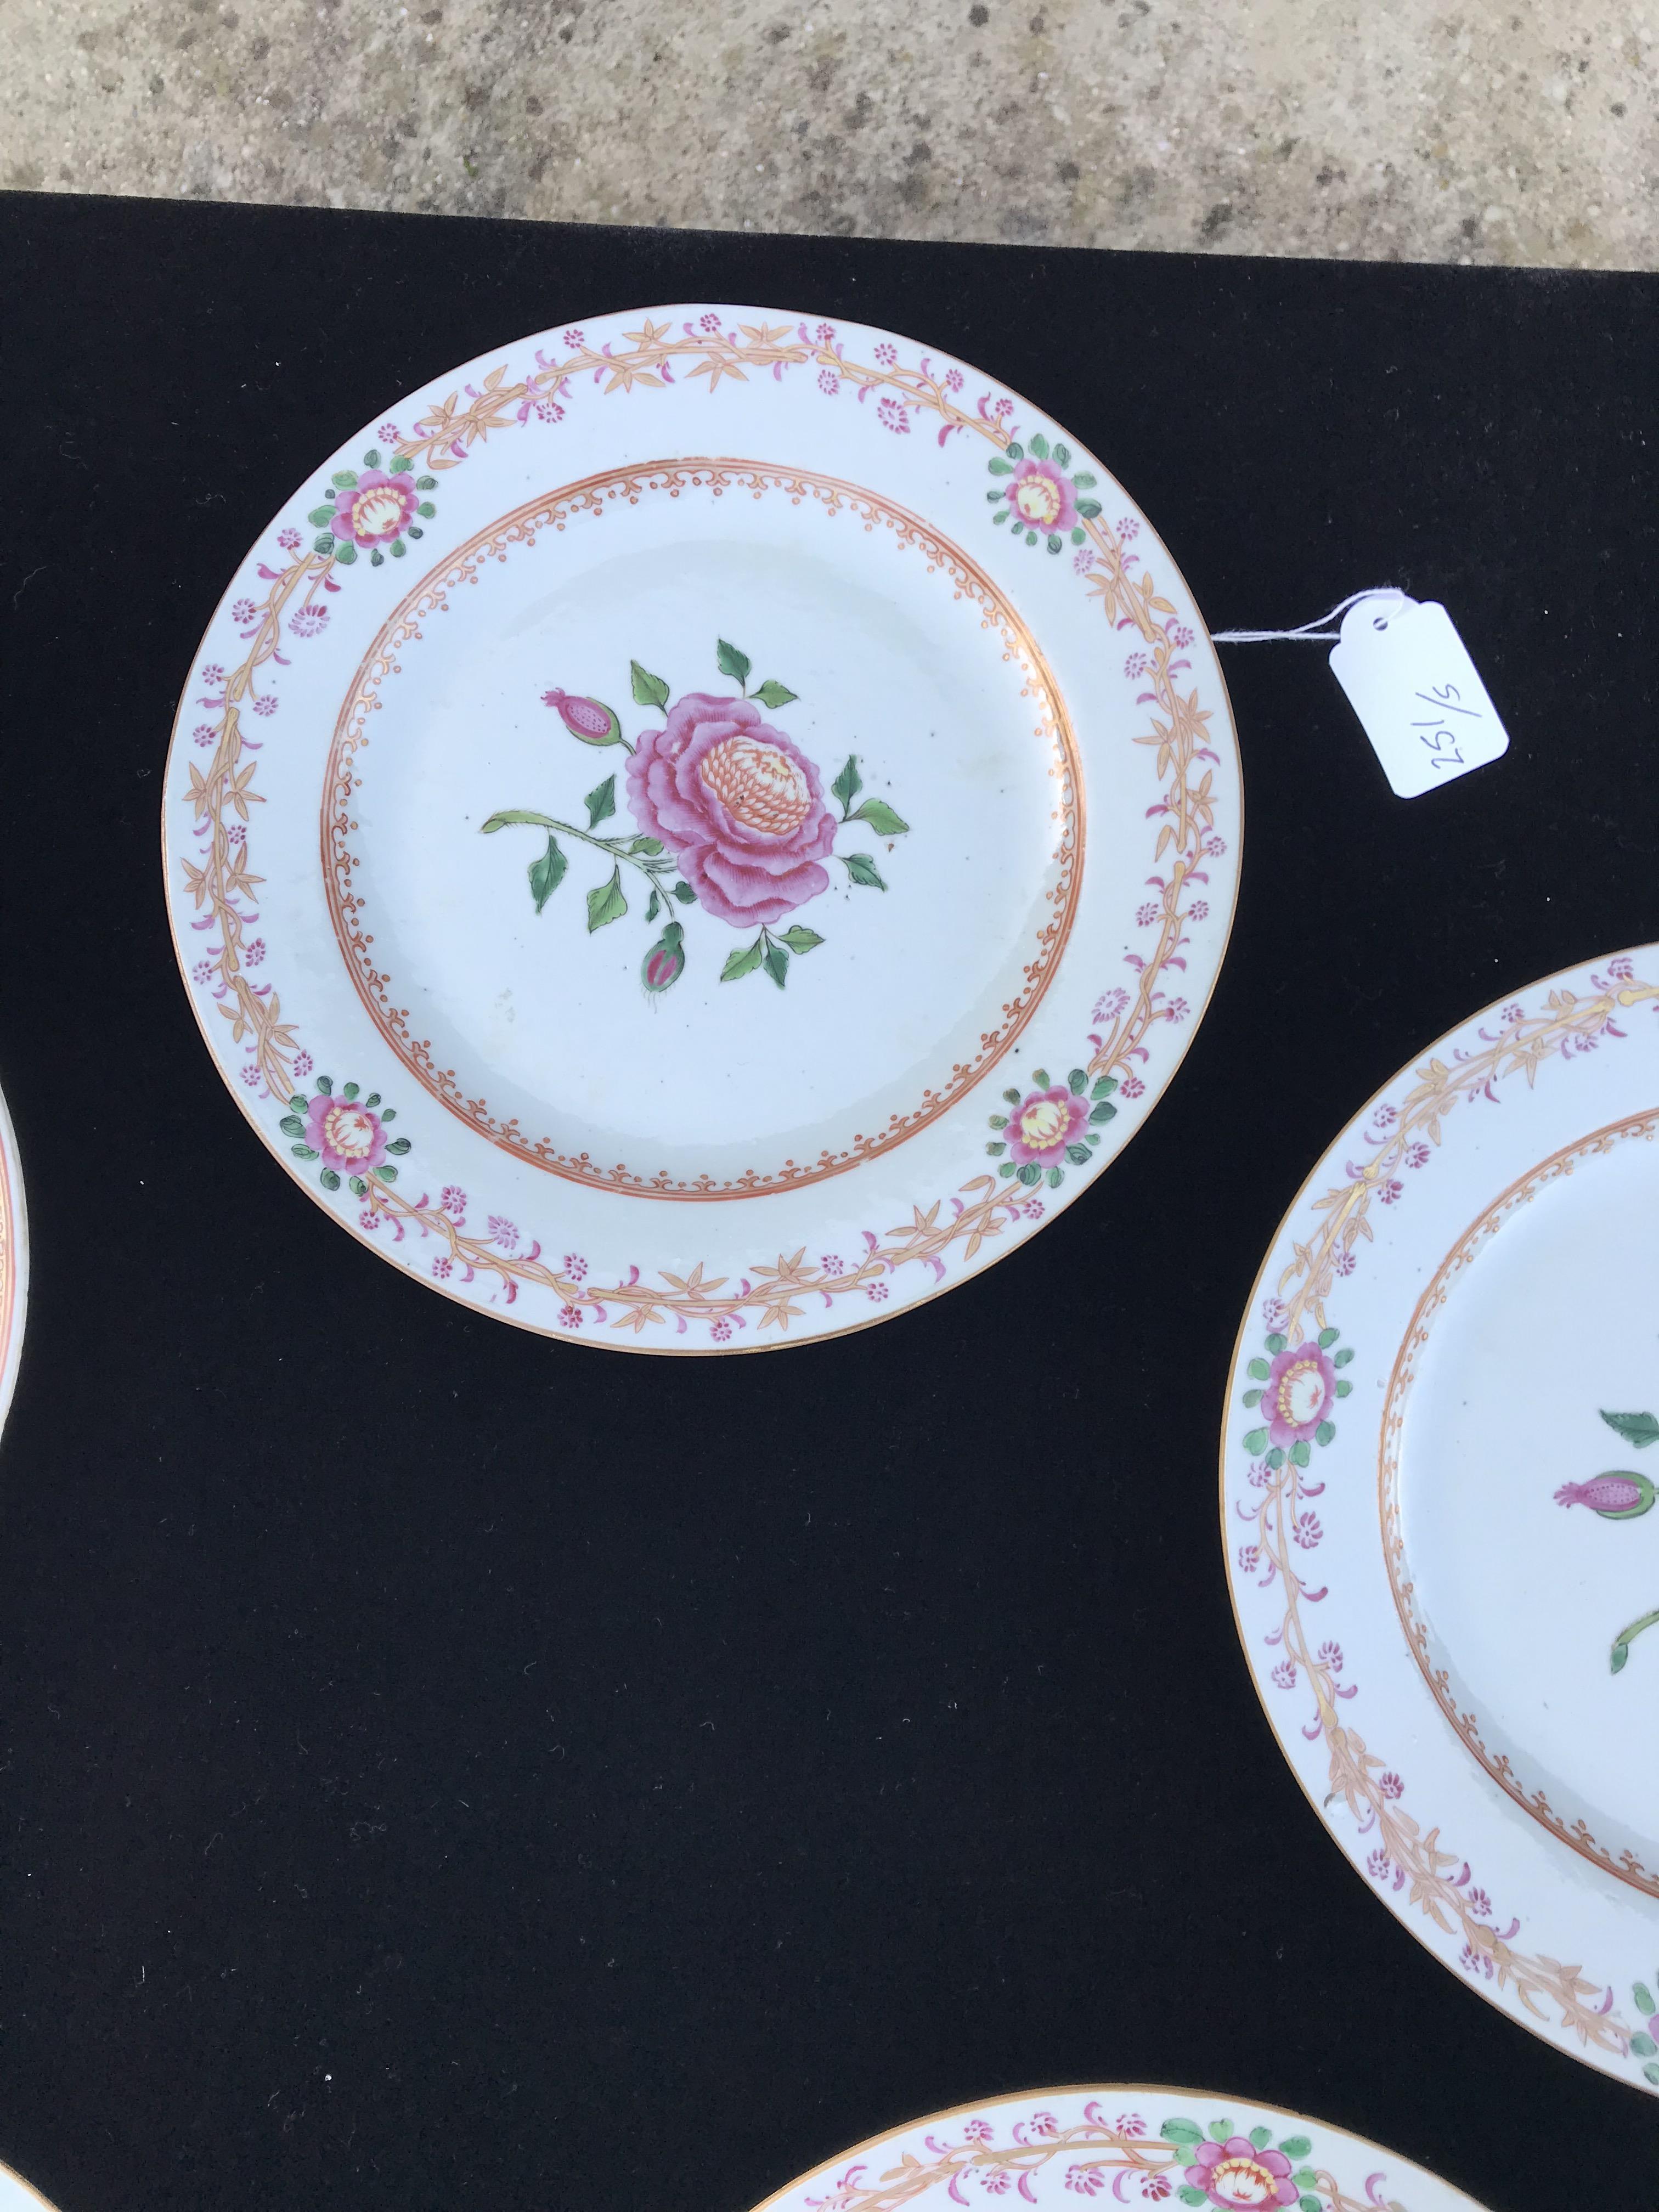 FOUR CHINESE EXPORT ‘FAMILLE-ROSE’ PORCELAIN ‘ADAM’S’ PATTERN PLATES, QIANLONG PERIOD, 1736 – 1795 - Image 4 of 8